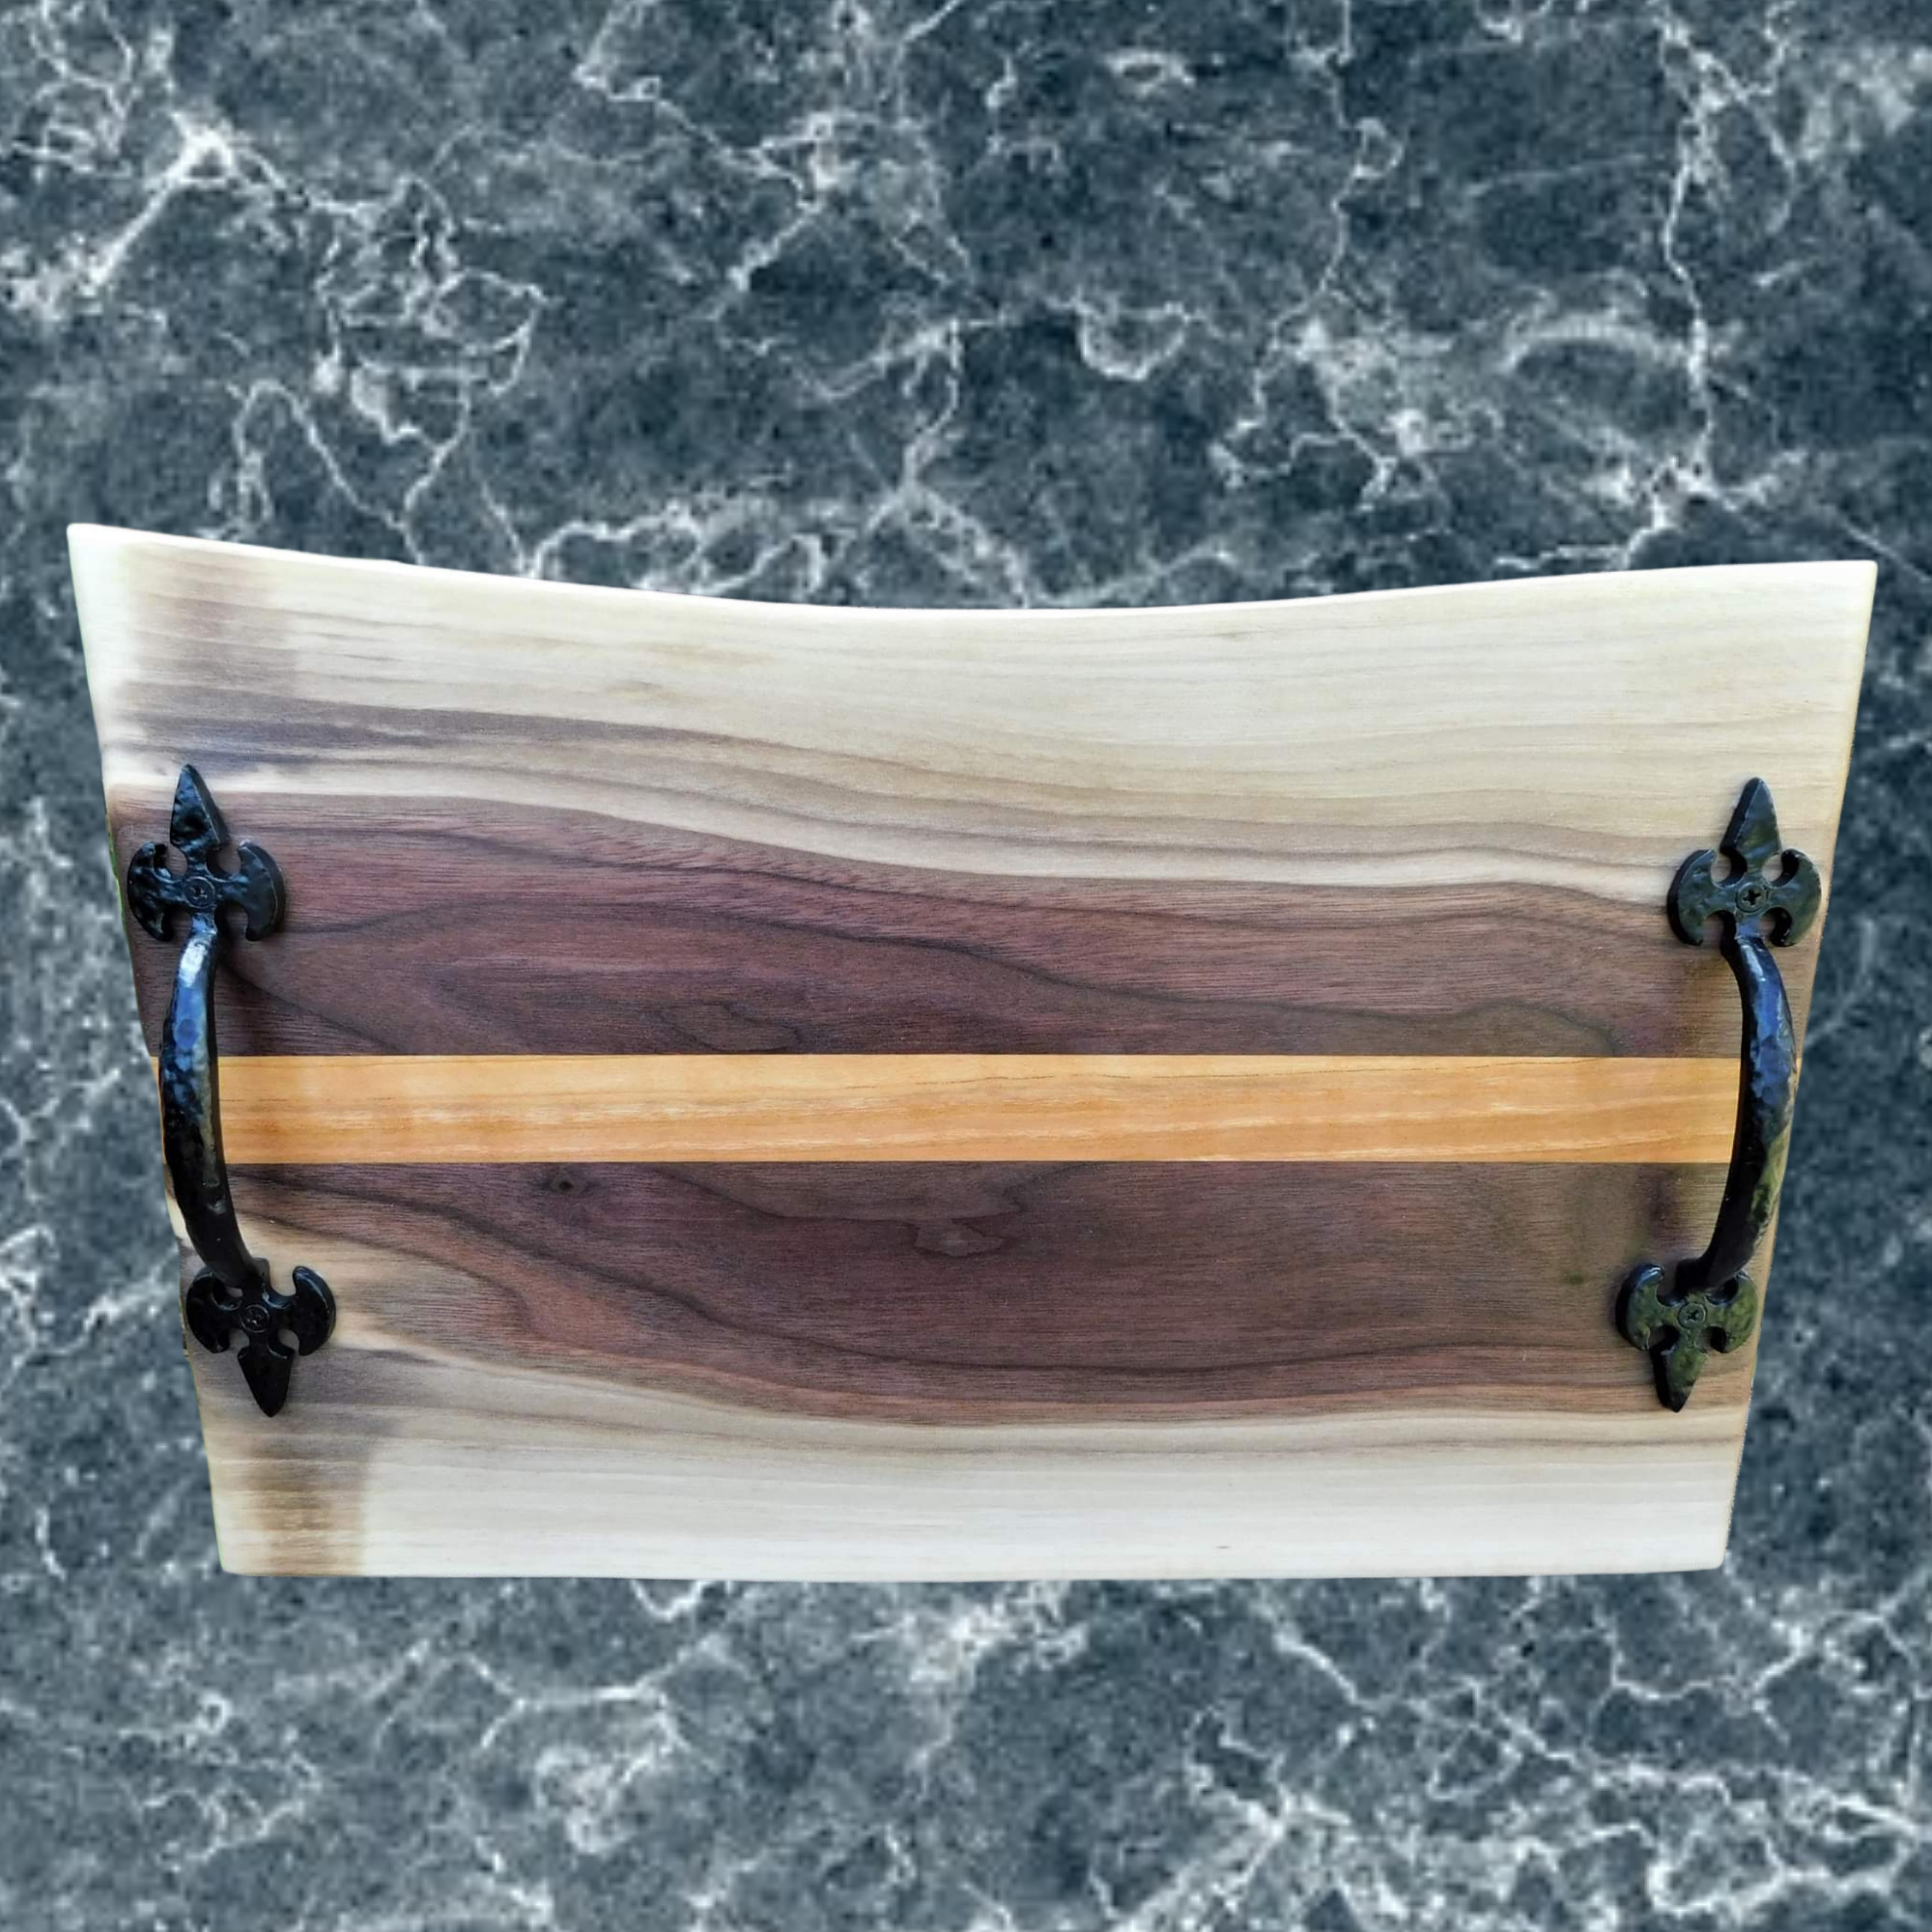 Black Walnut Charcuterie Board with Cherry Wood Accent Stripe, Wrought Iron Handles, & Clear Rubber Grip Feet